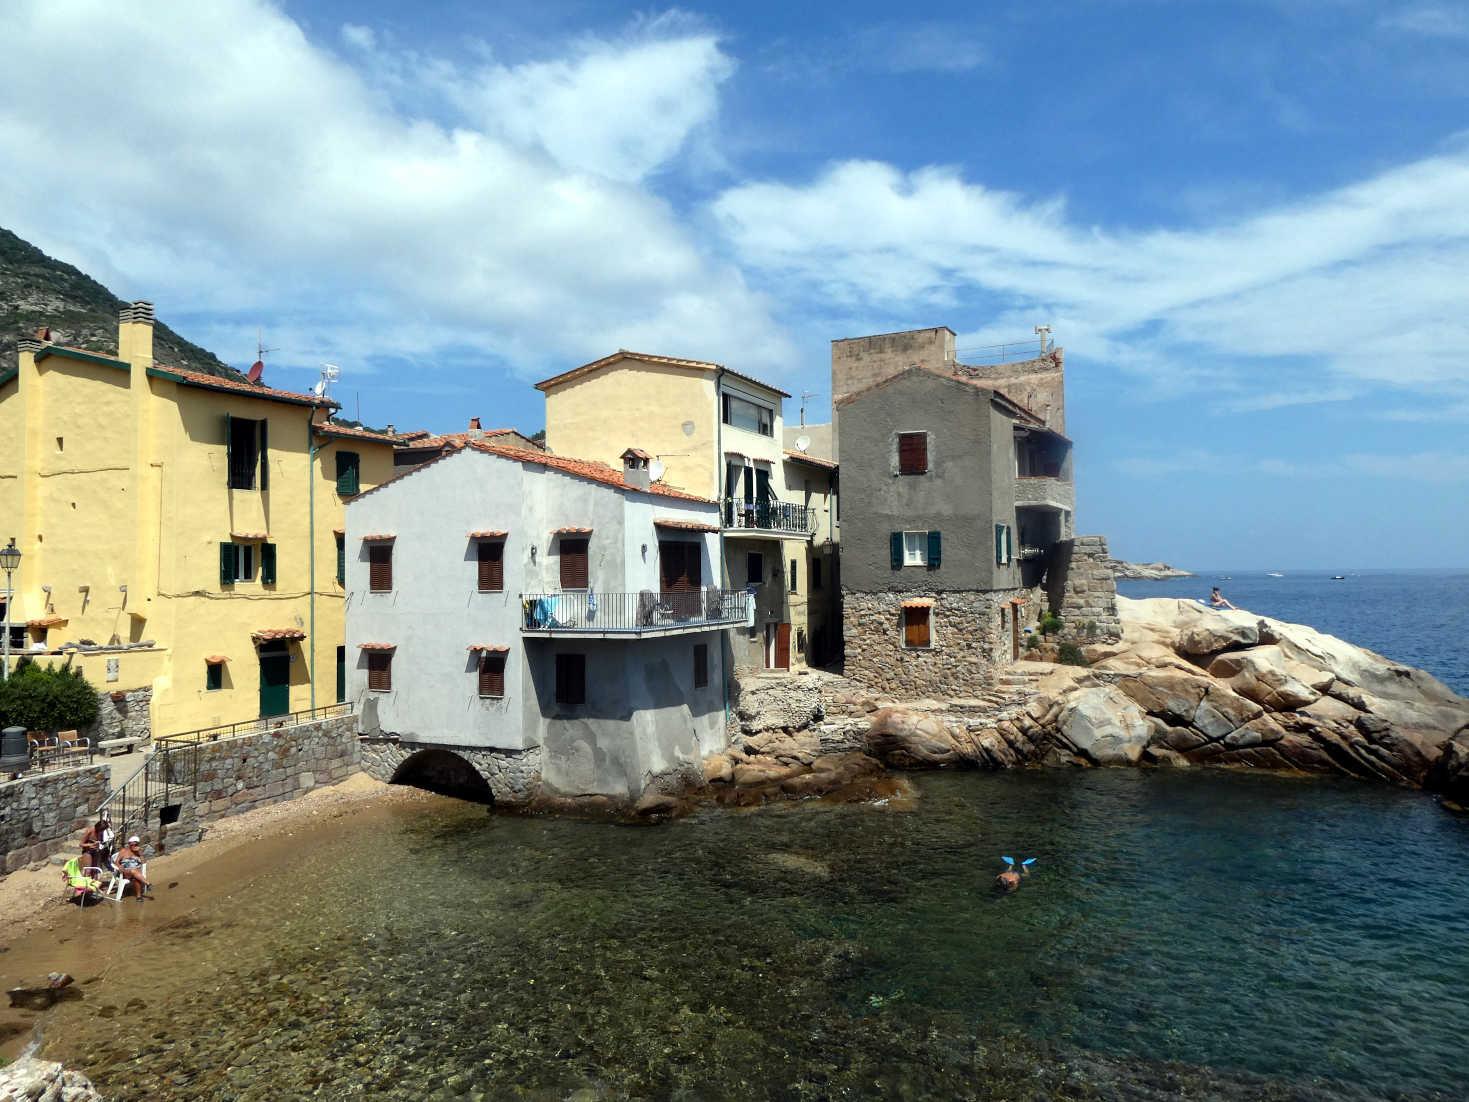 the wee cove at porta giglio